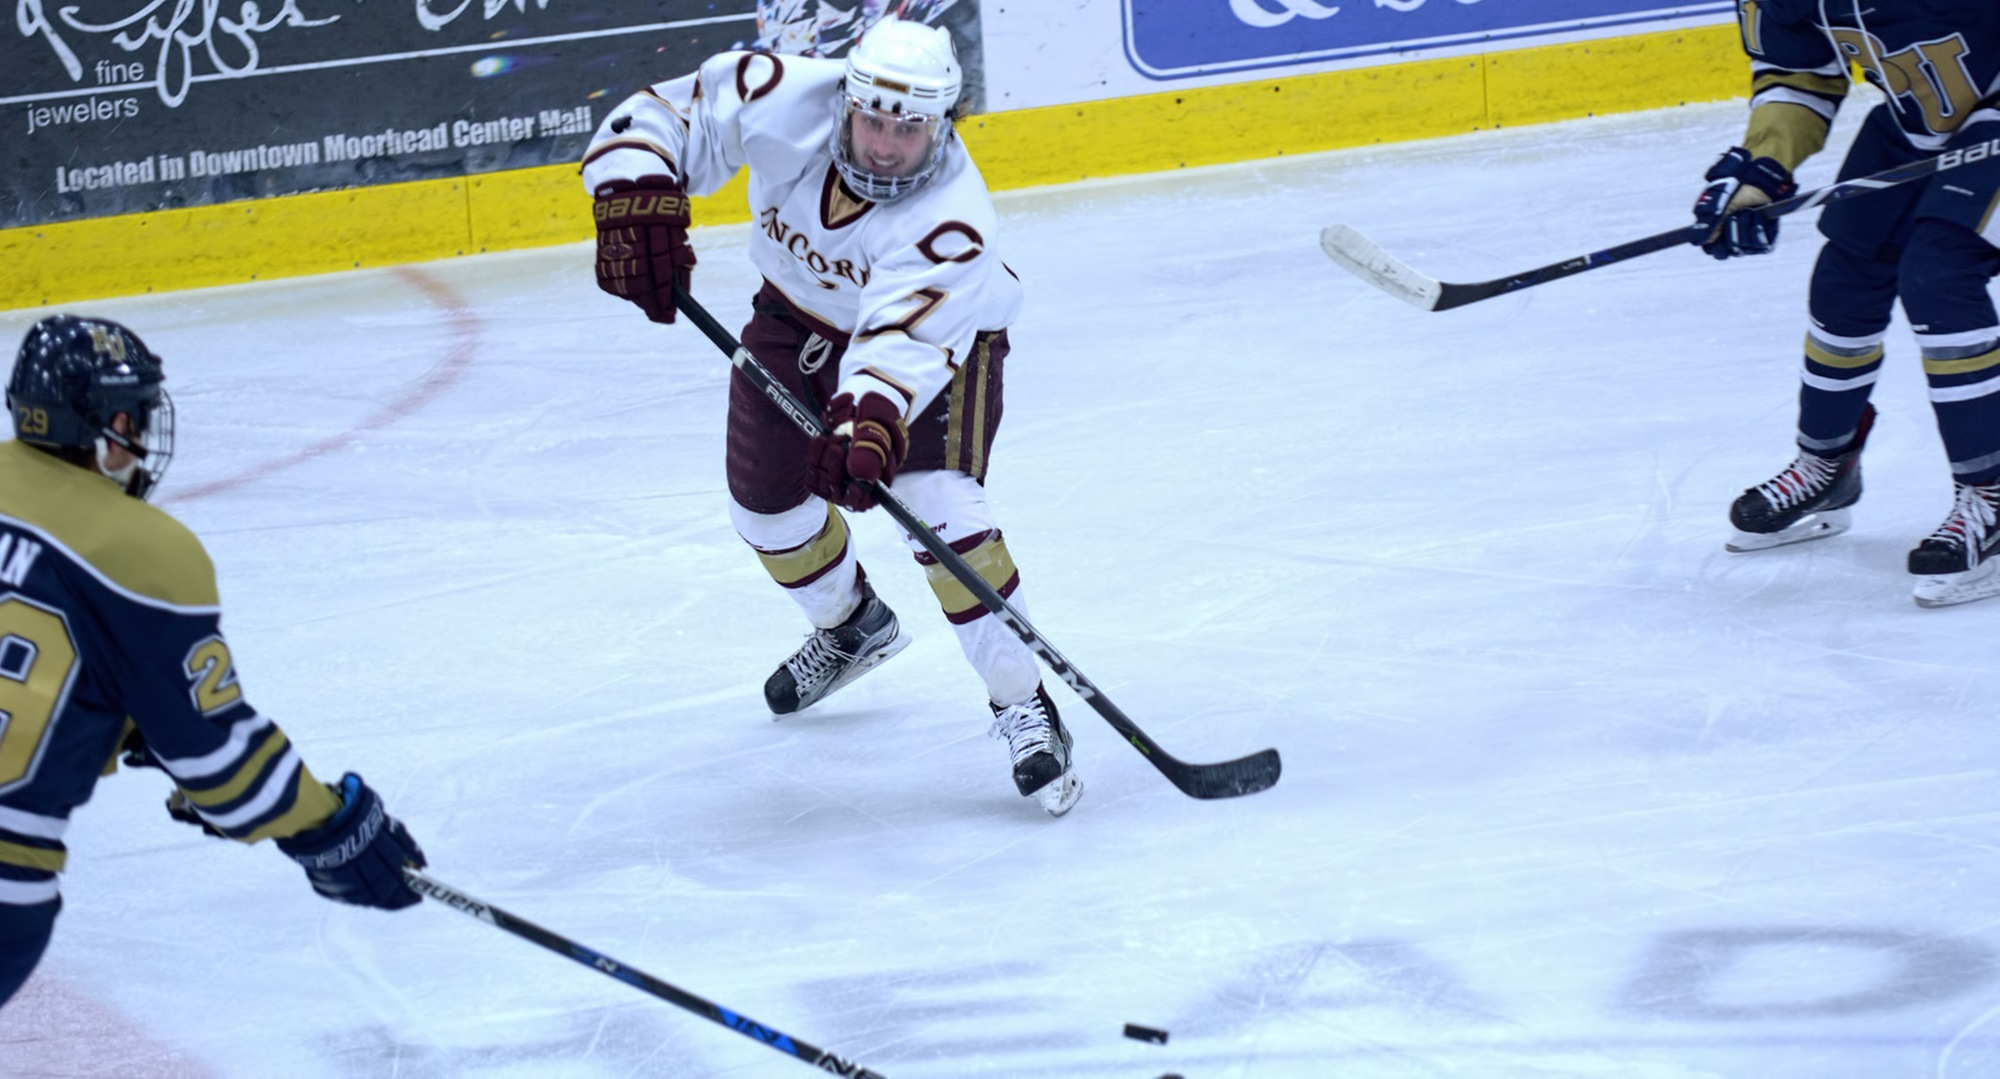 Joe Burgmeier had a game-high five shots on goal in the Cobbers' series finale at St. Olaf.